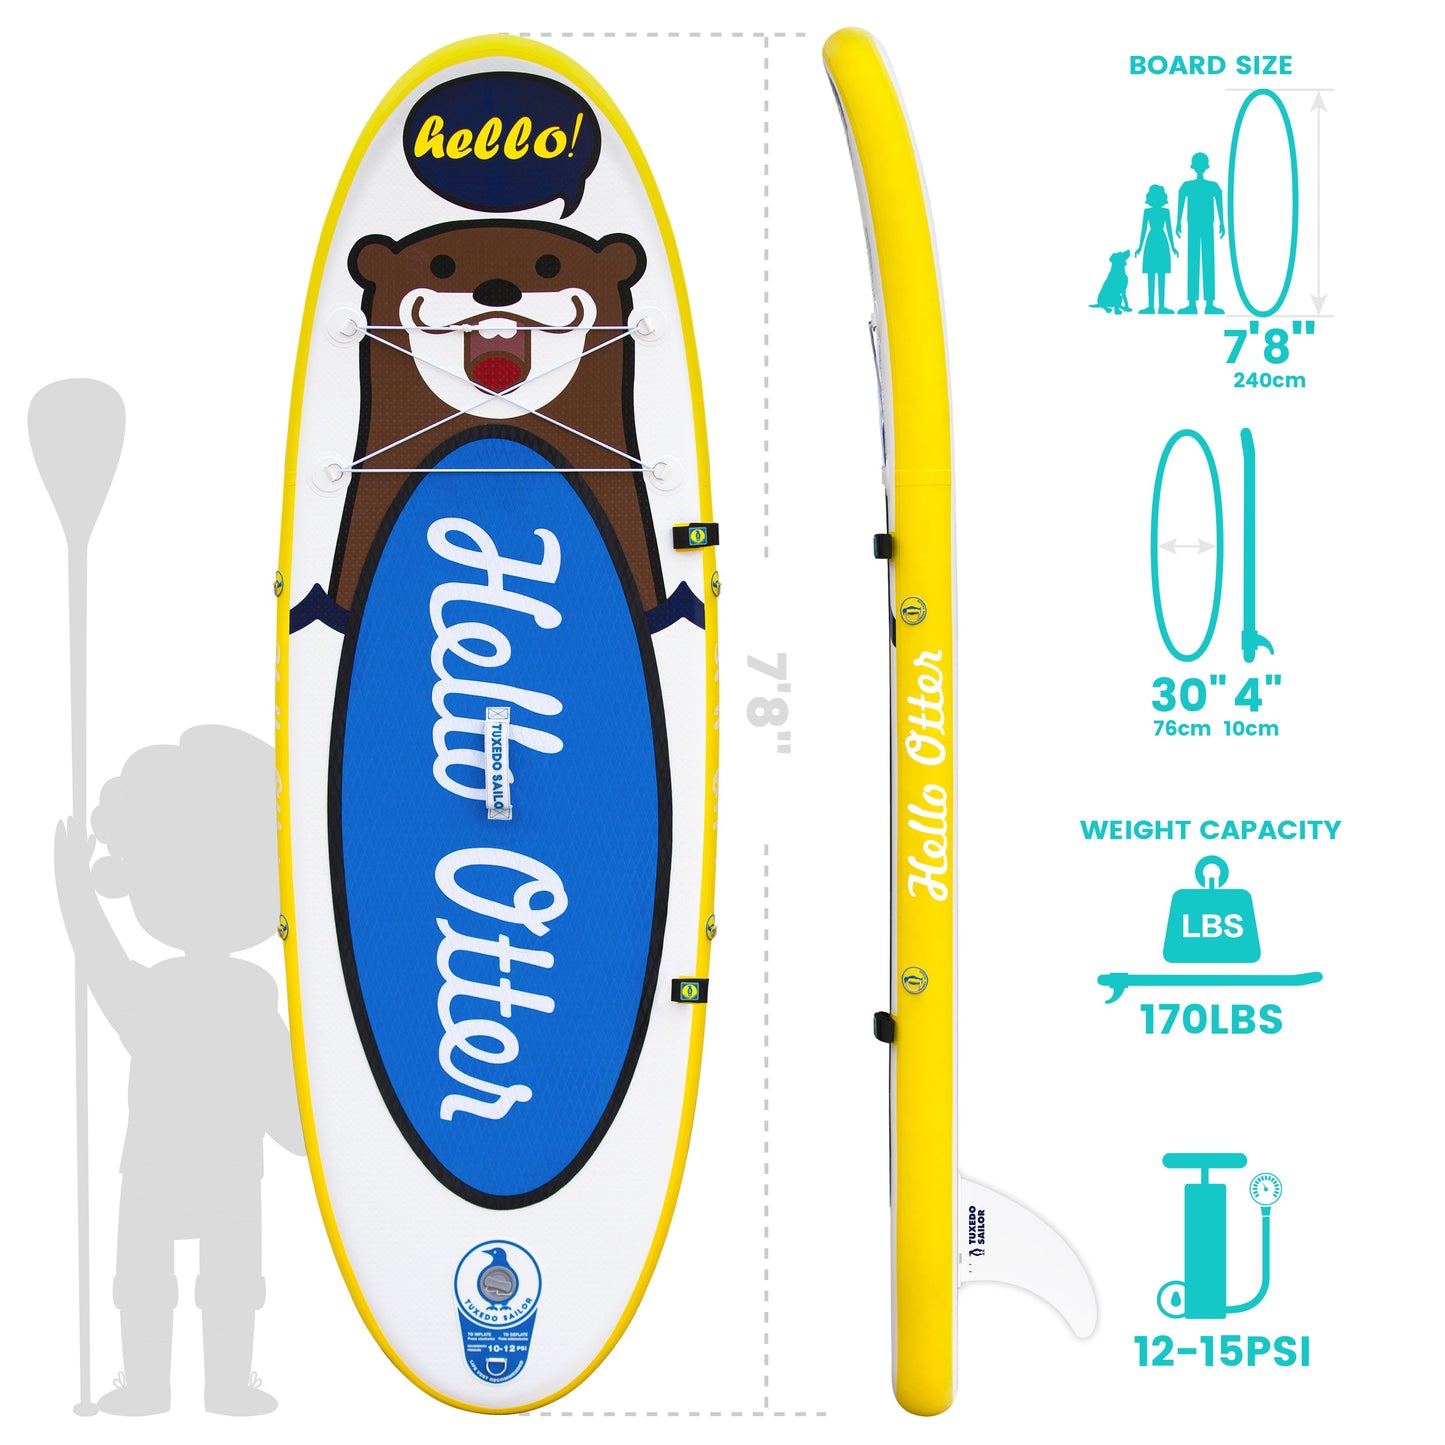 funwater inflatable paddle board designed for children 8' with a sup general seat